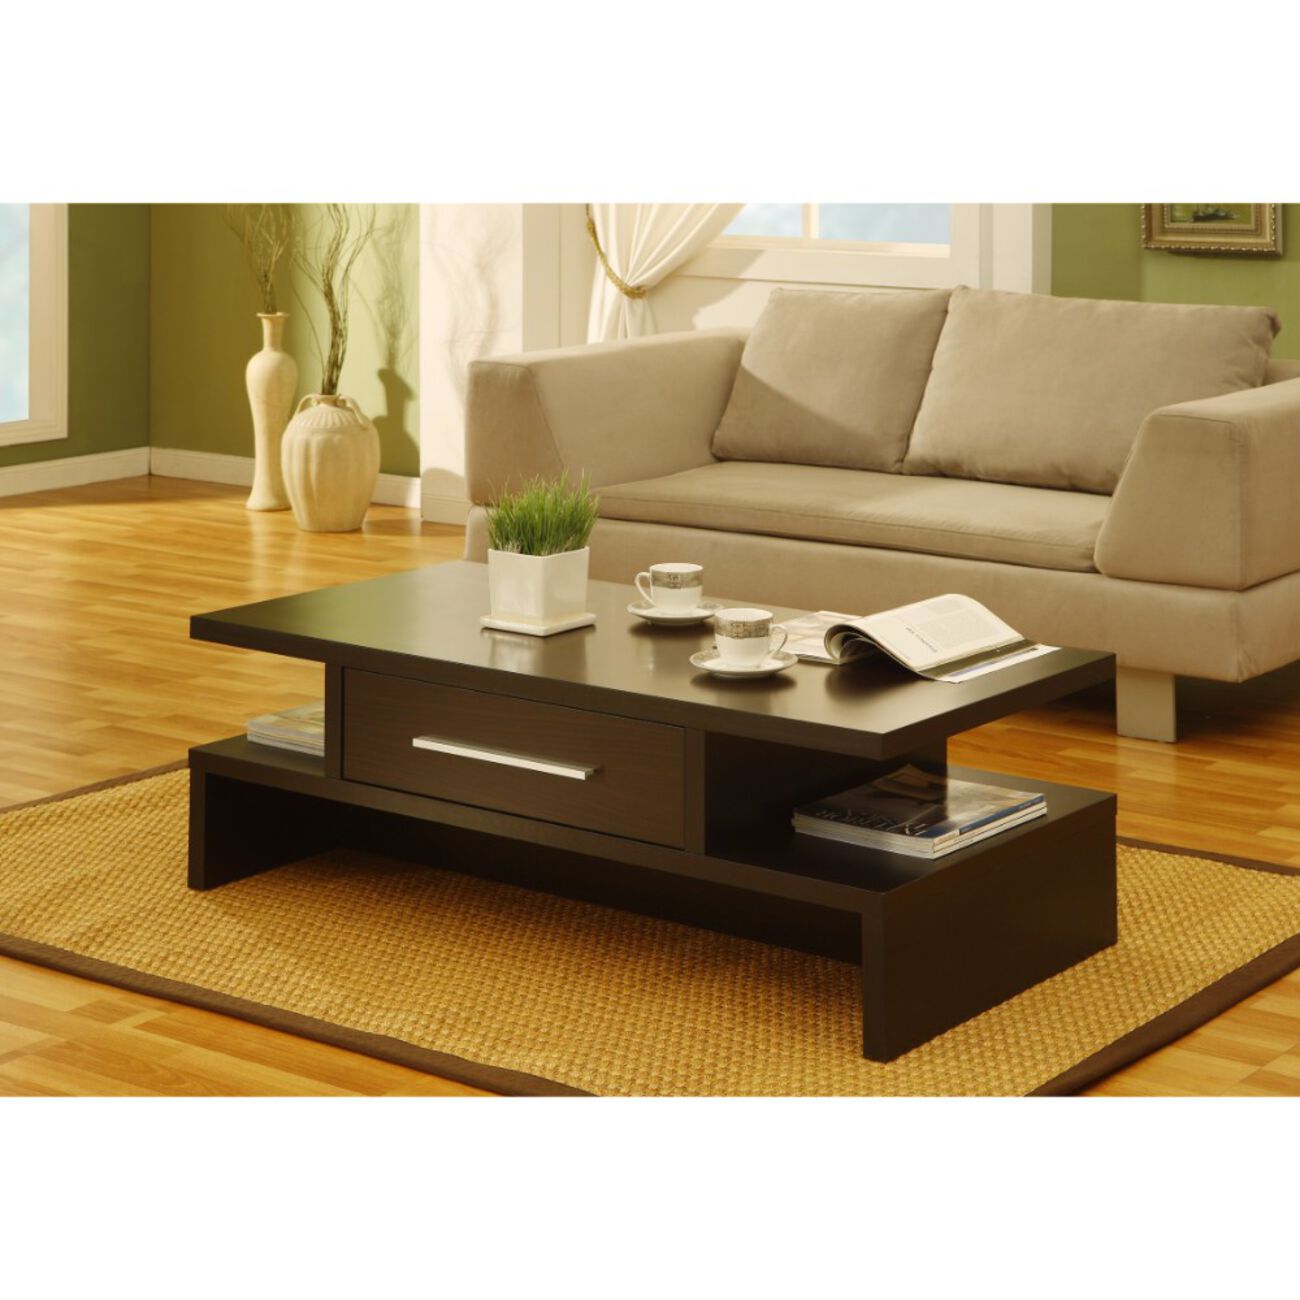 Unique Style Coffee Table With Bar Handle Drawer, Brown